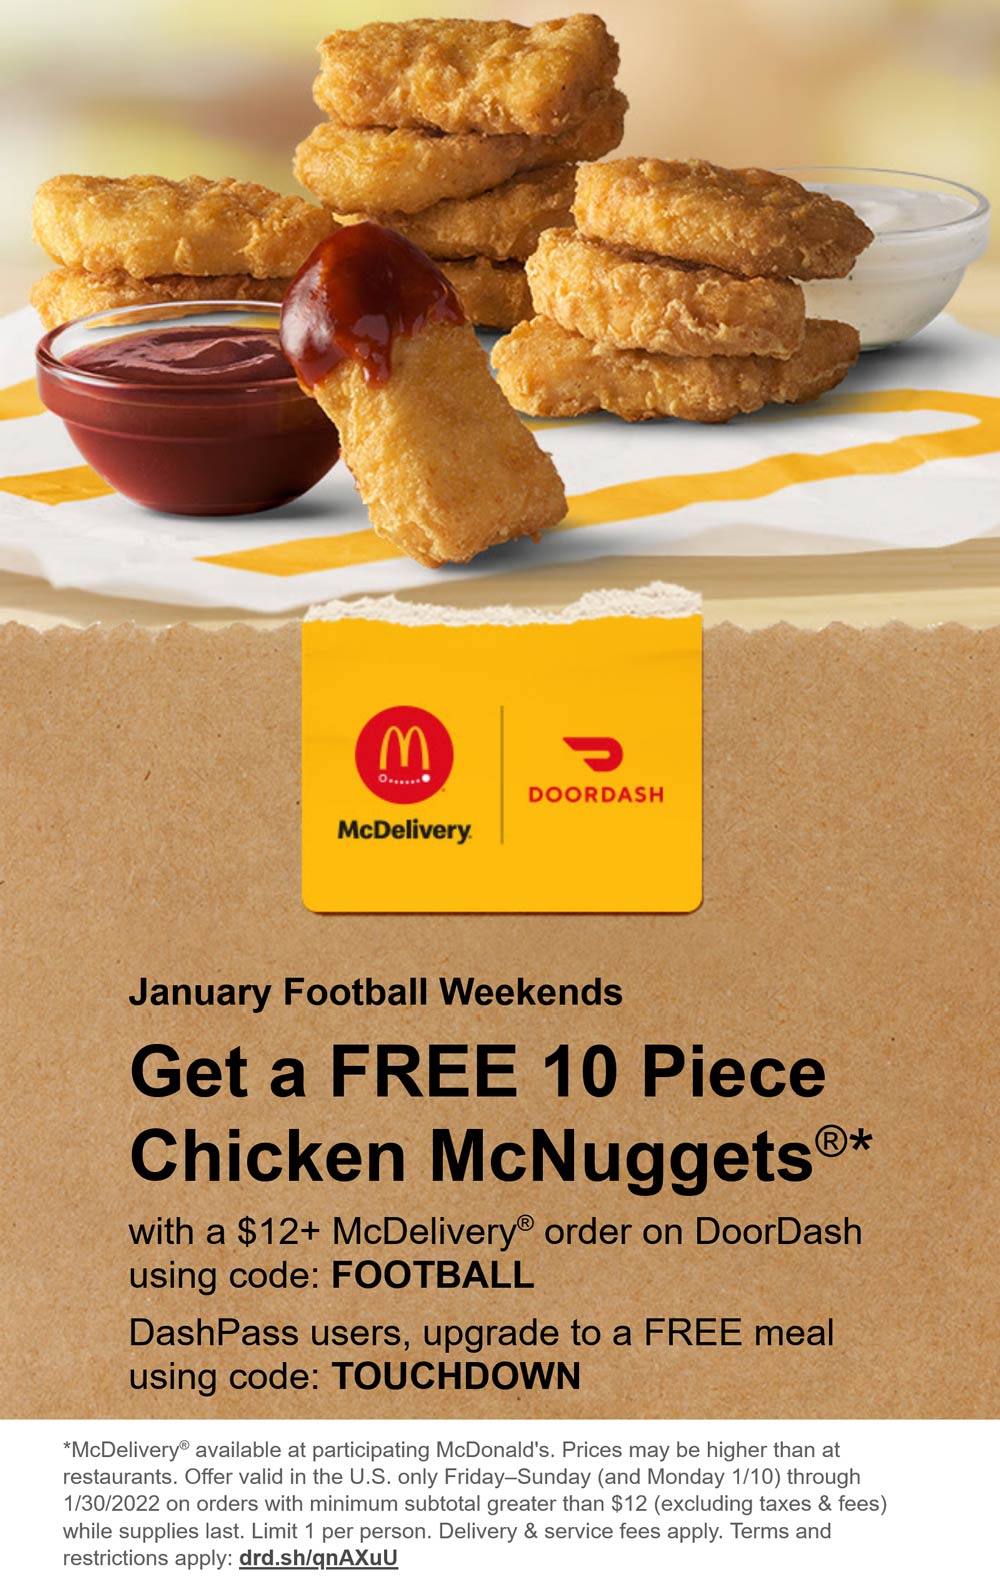 McDonalds restaurants Coupon  Free 10pc chicken nuggets with $12 delivery & more weekends at McDonalds via promo code FOOTBALL #mcdonalds 